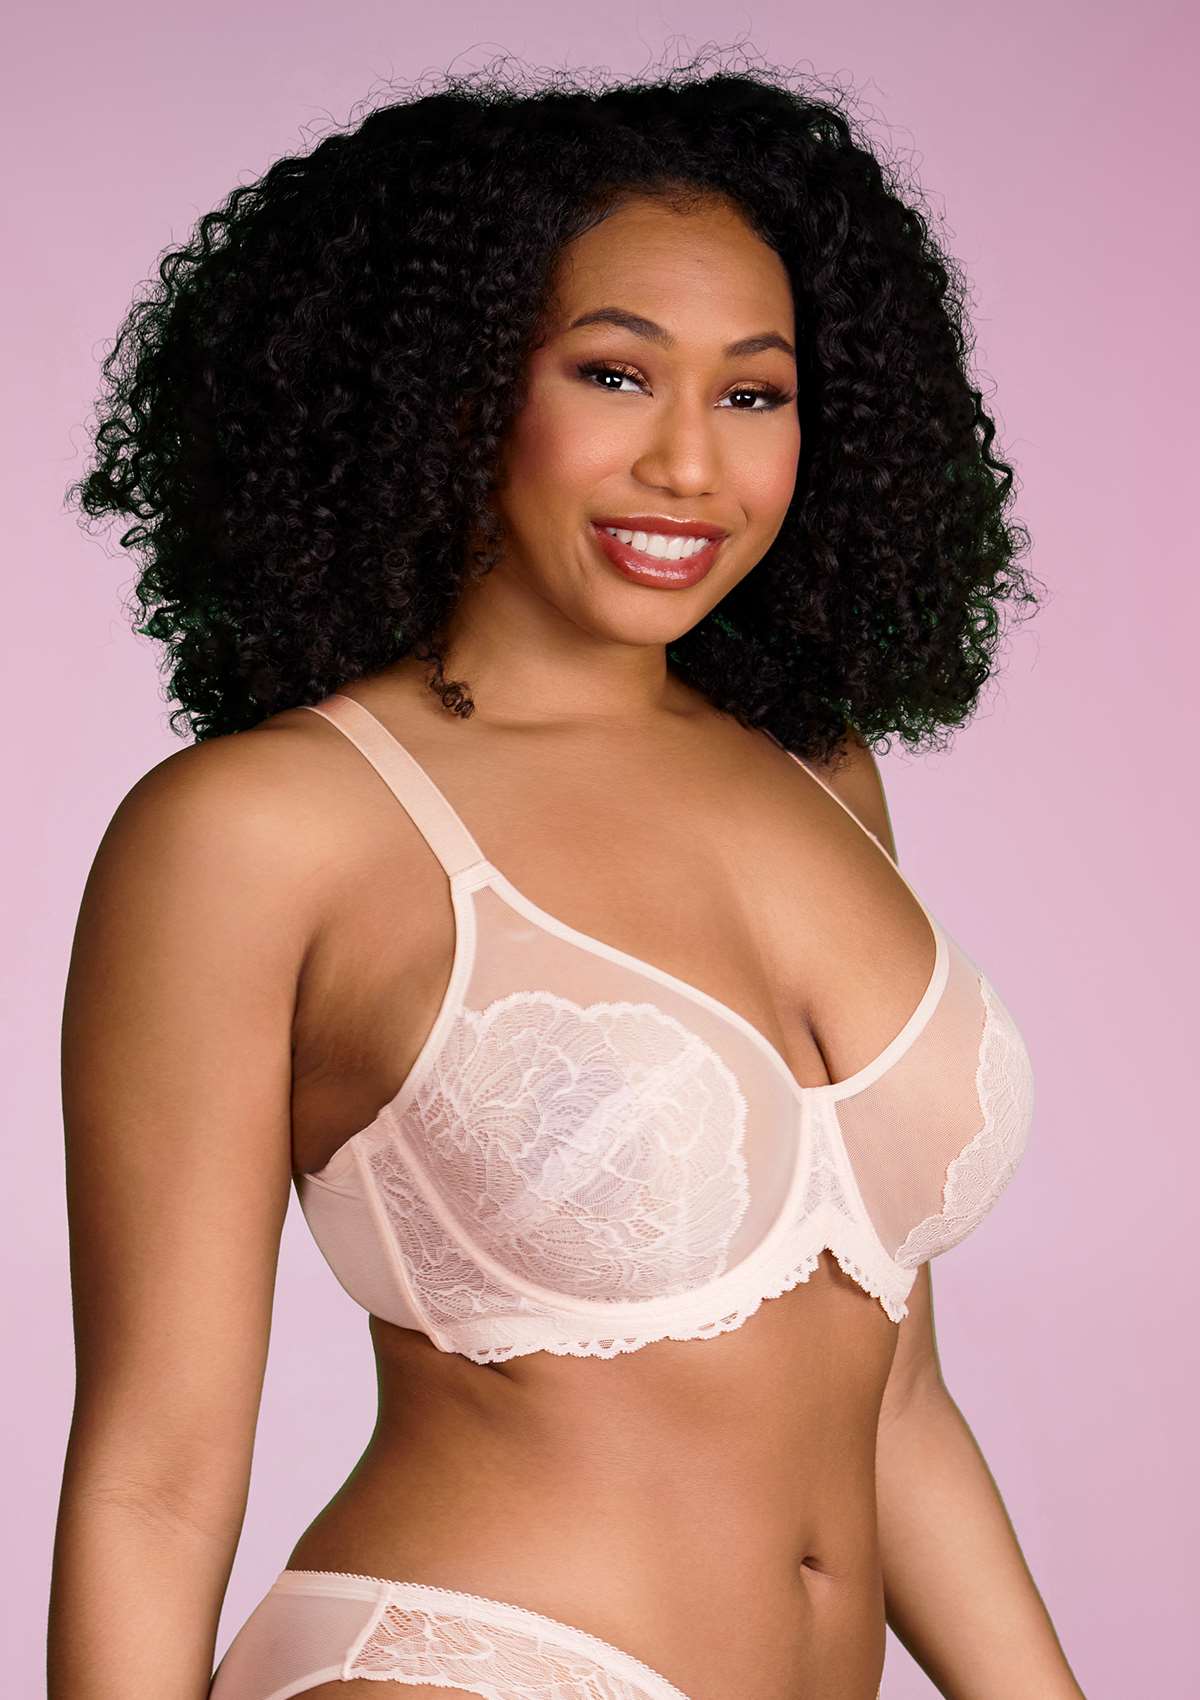 HSIA Blossom Sheer Lace Bra: Comfortable Underwire Bra For Big Busts - White / 34 / D